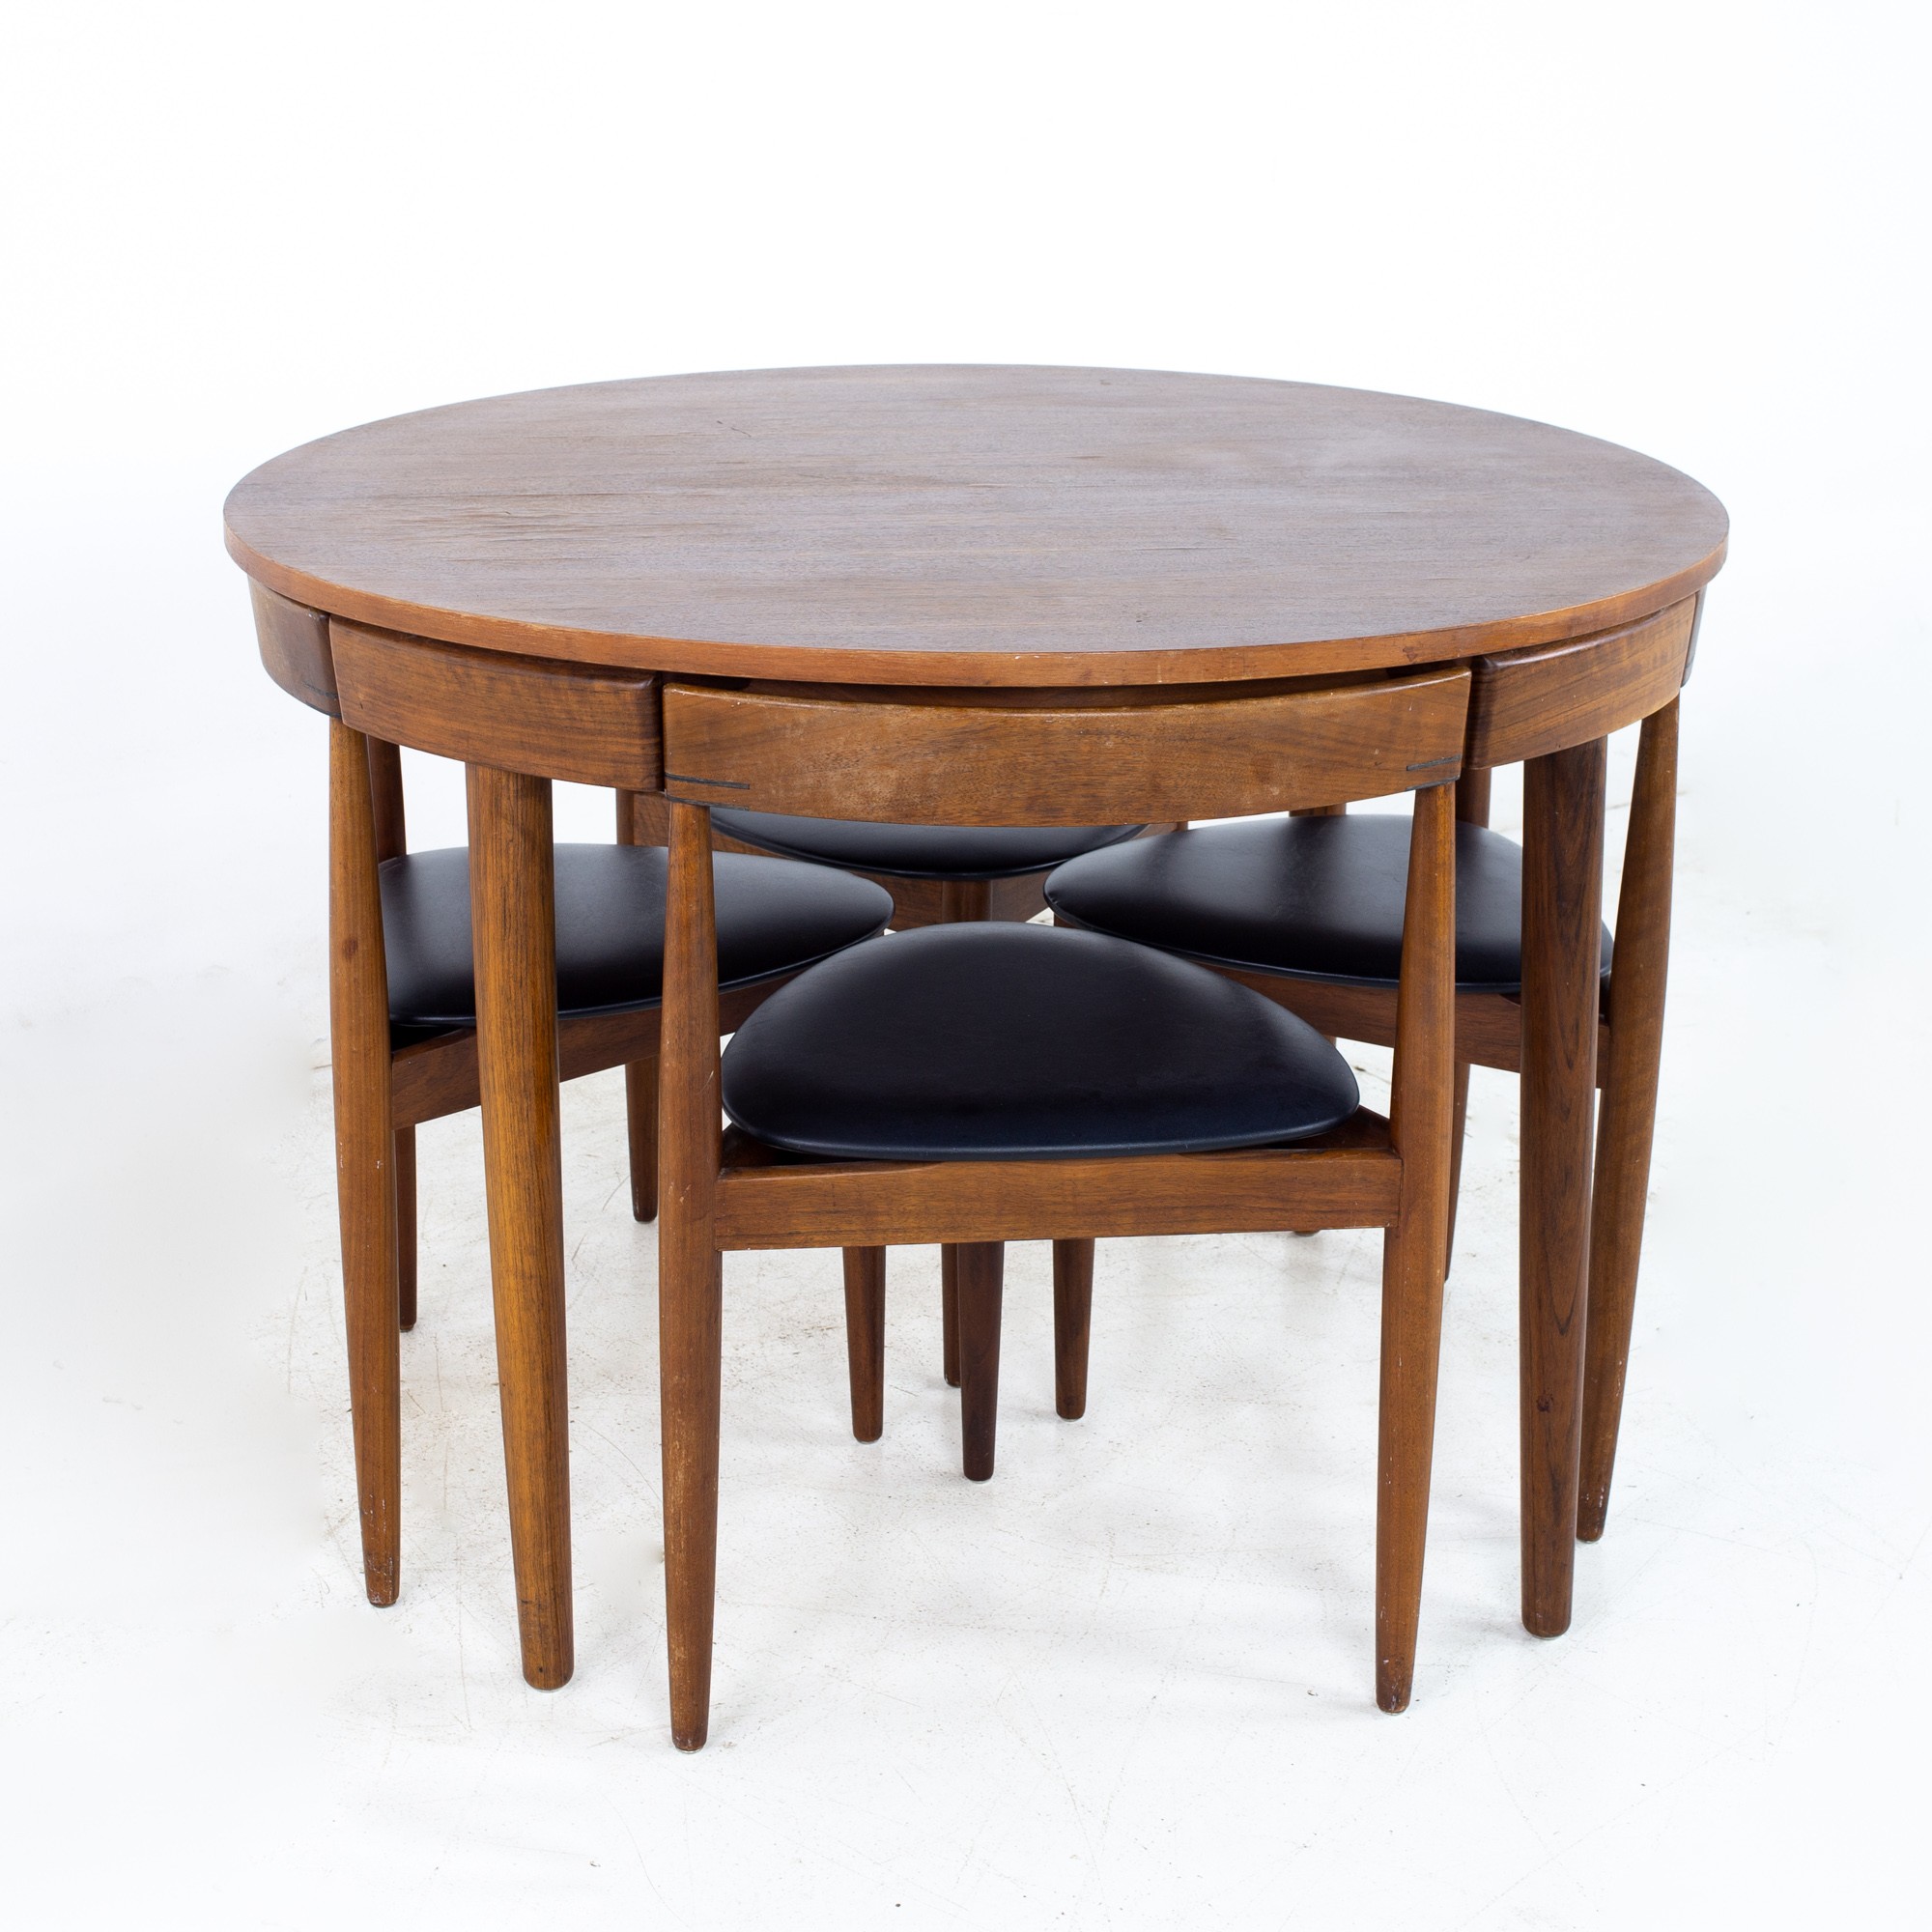 Hans Olsen for Frem Røjle Mid Century Round Danish Teak Dining Table with Set of 4 Nesting Chairs